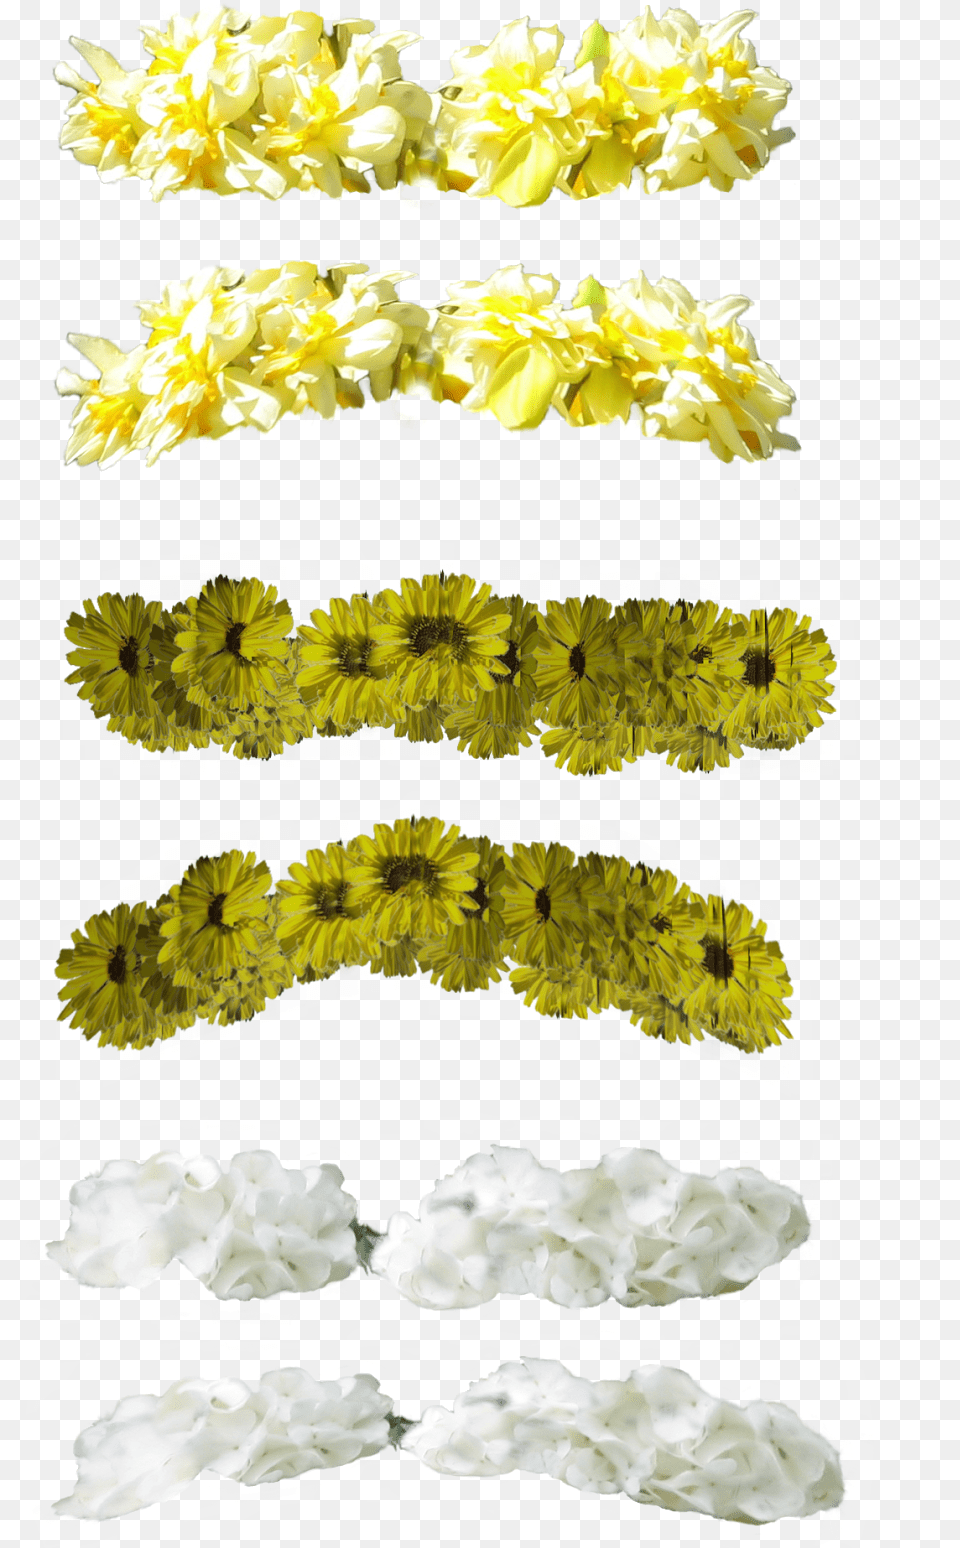 Crown Tumblr Crown Tumblr Green And Yellow Crown Flower, Plant, Petal, Flower Arrangement, Daisy Free Transparent Png